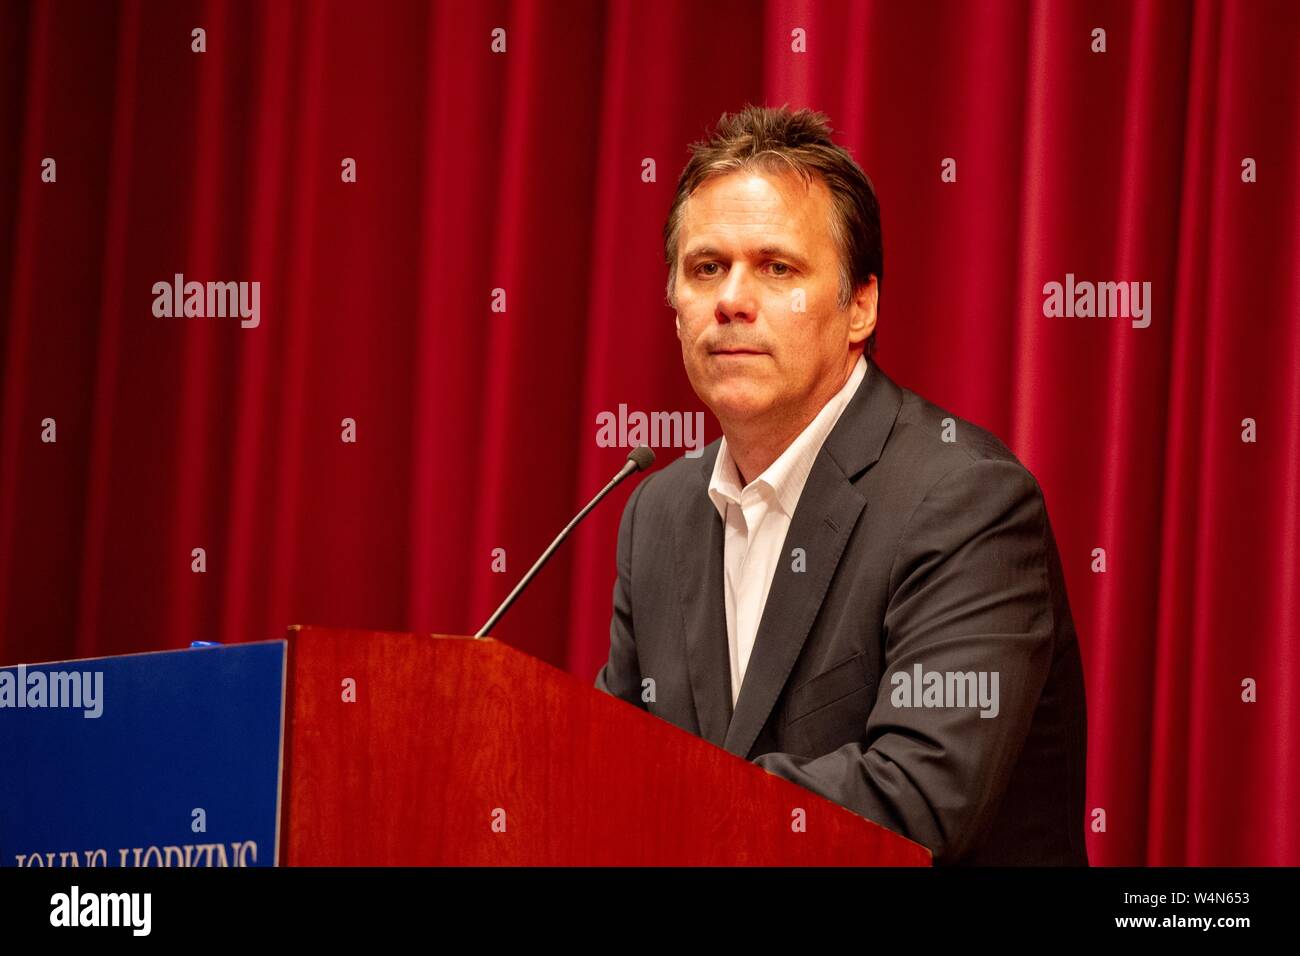 Richard Roeper, columnist and film critic, standing behind a podium during a Milton S Eisenhower Symposium at the Johns Hopkins University, Baltimore, Maryland, October 5, 2010. From the Homewood Photography Collection. () Stock Photo